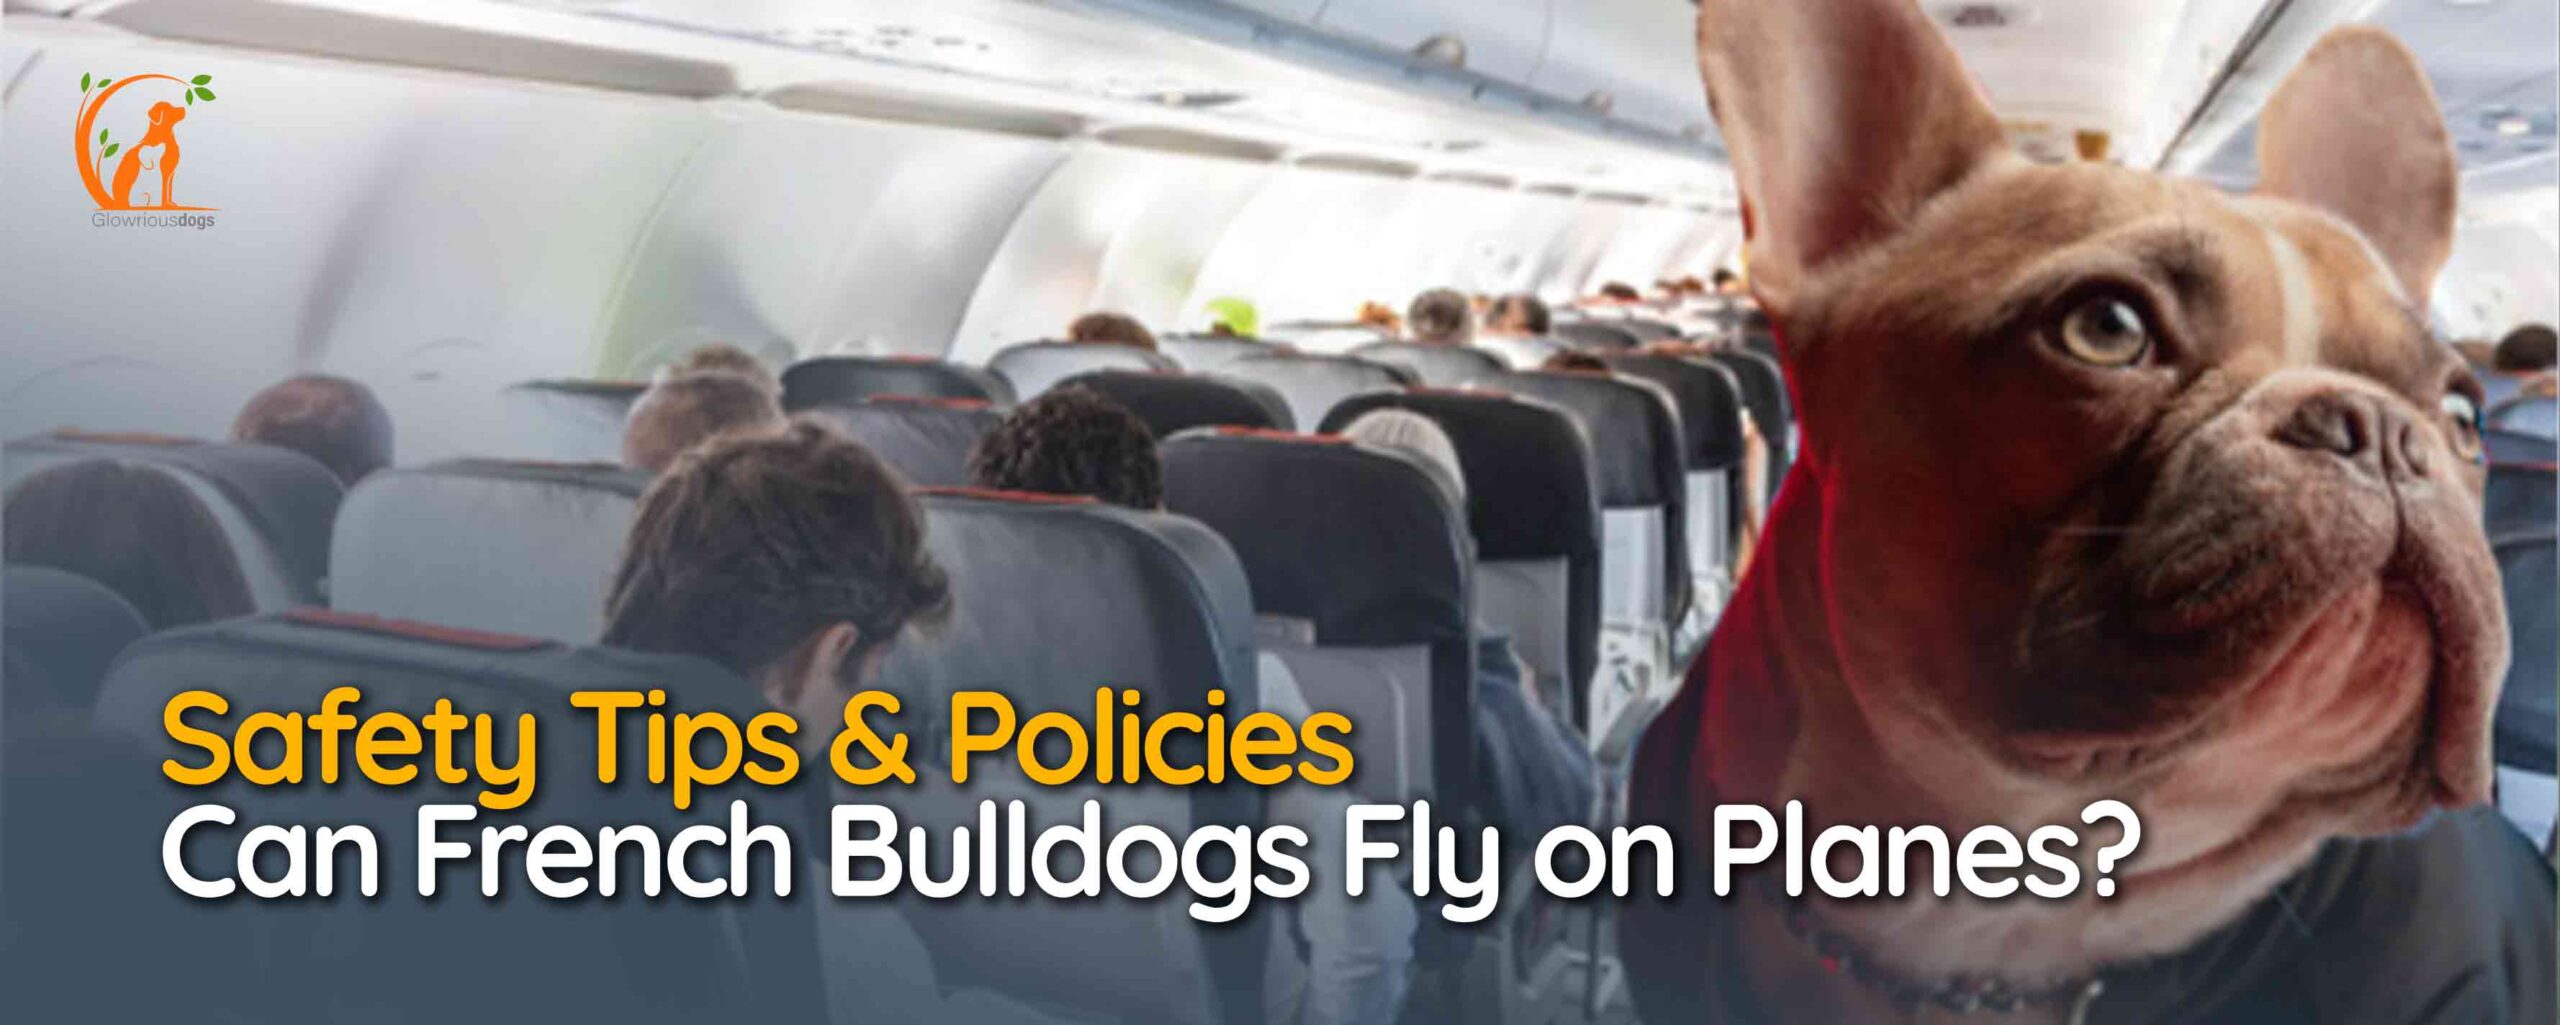 Can French Bulldogs Fly on Planes